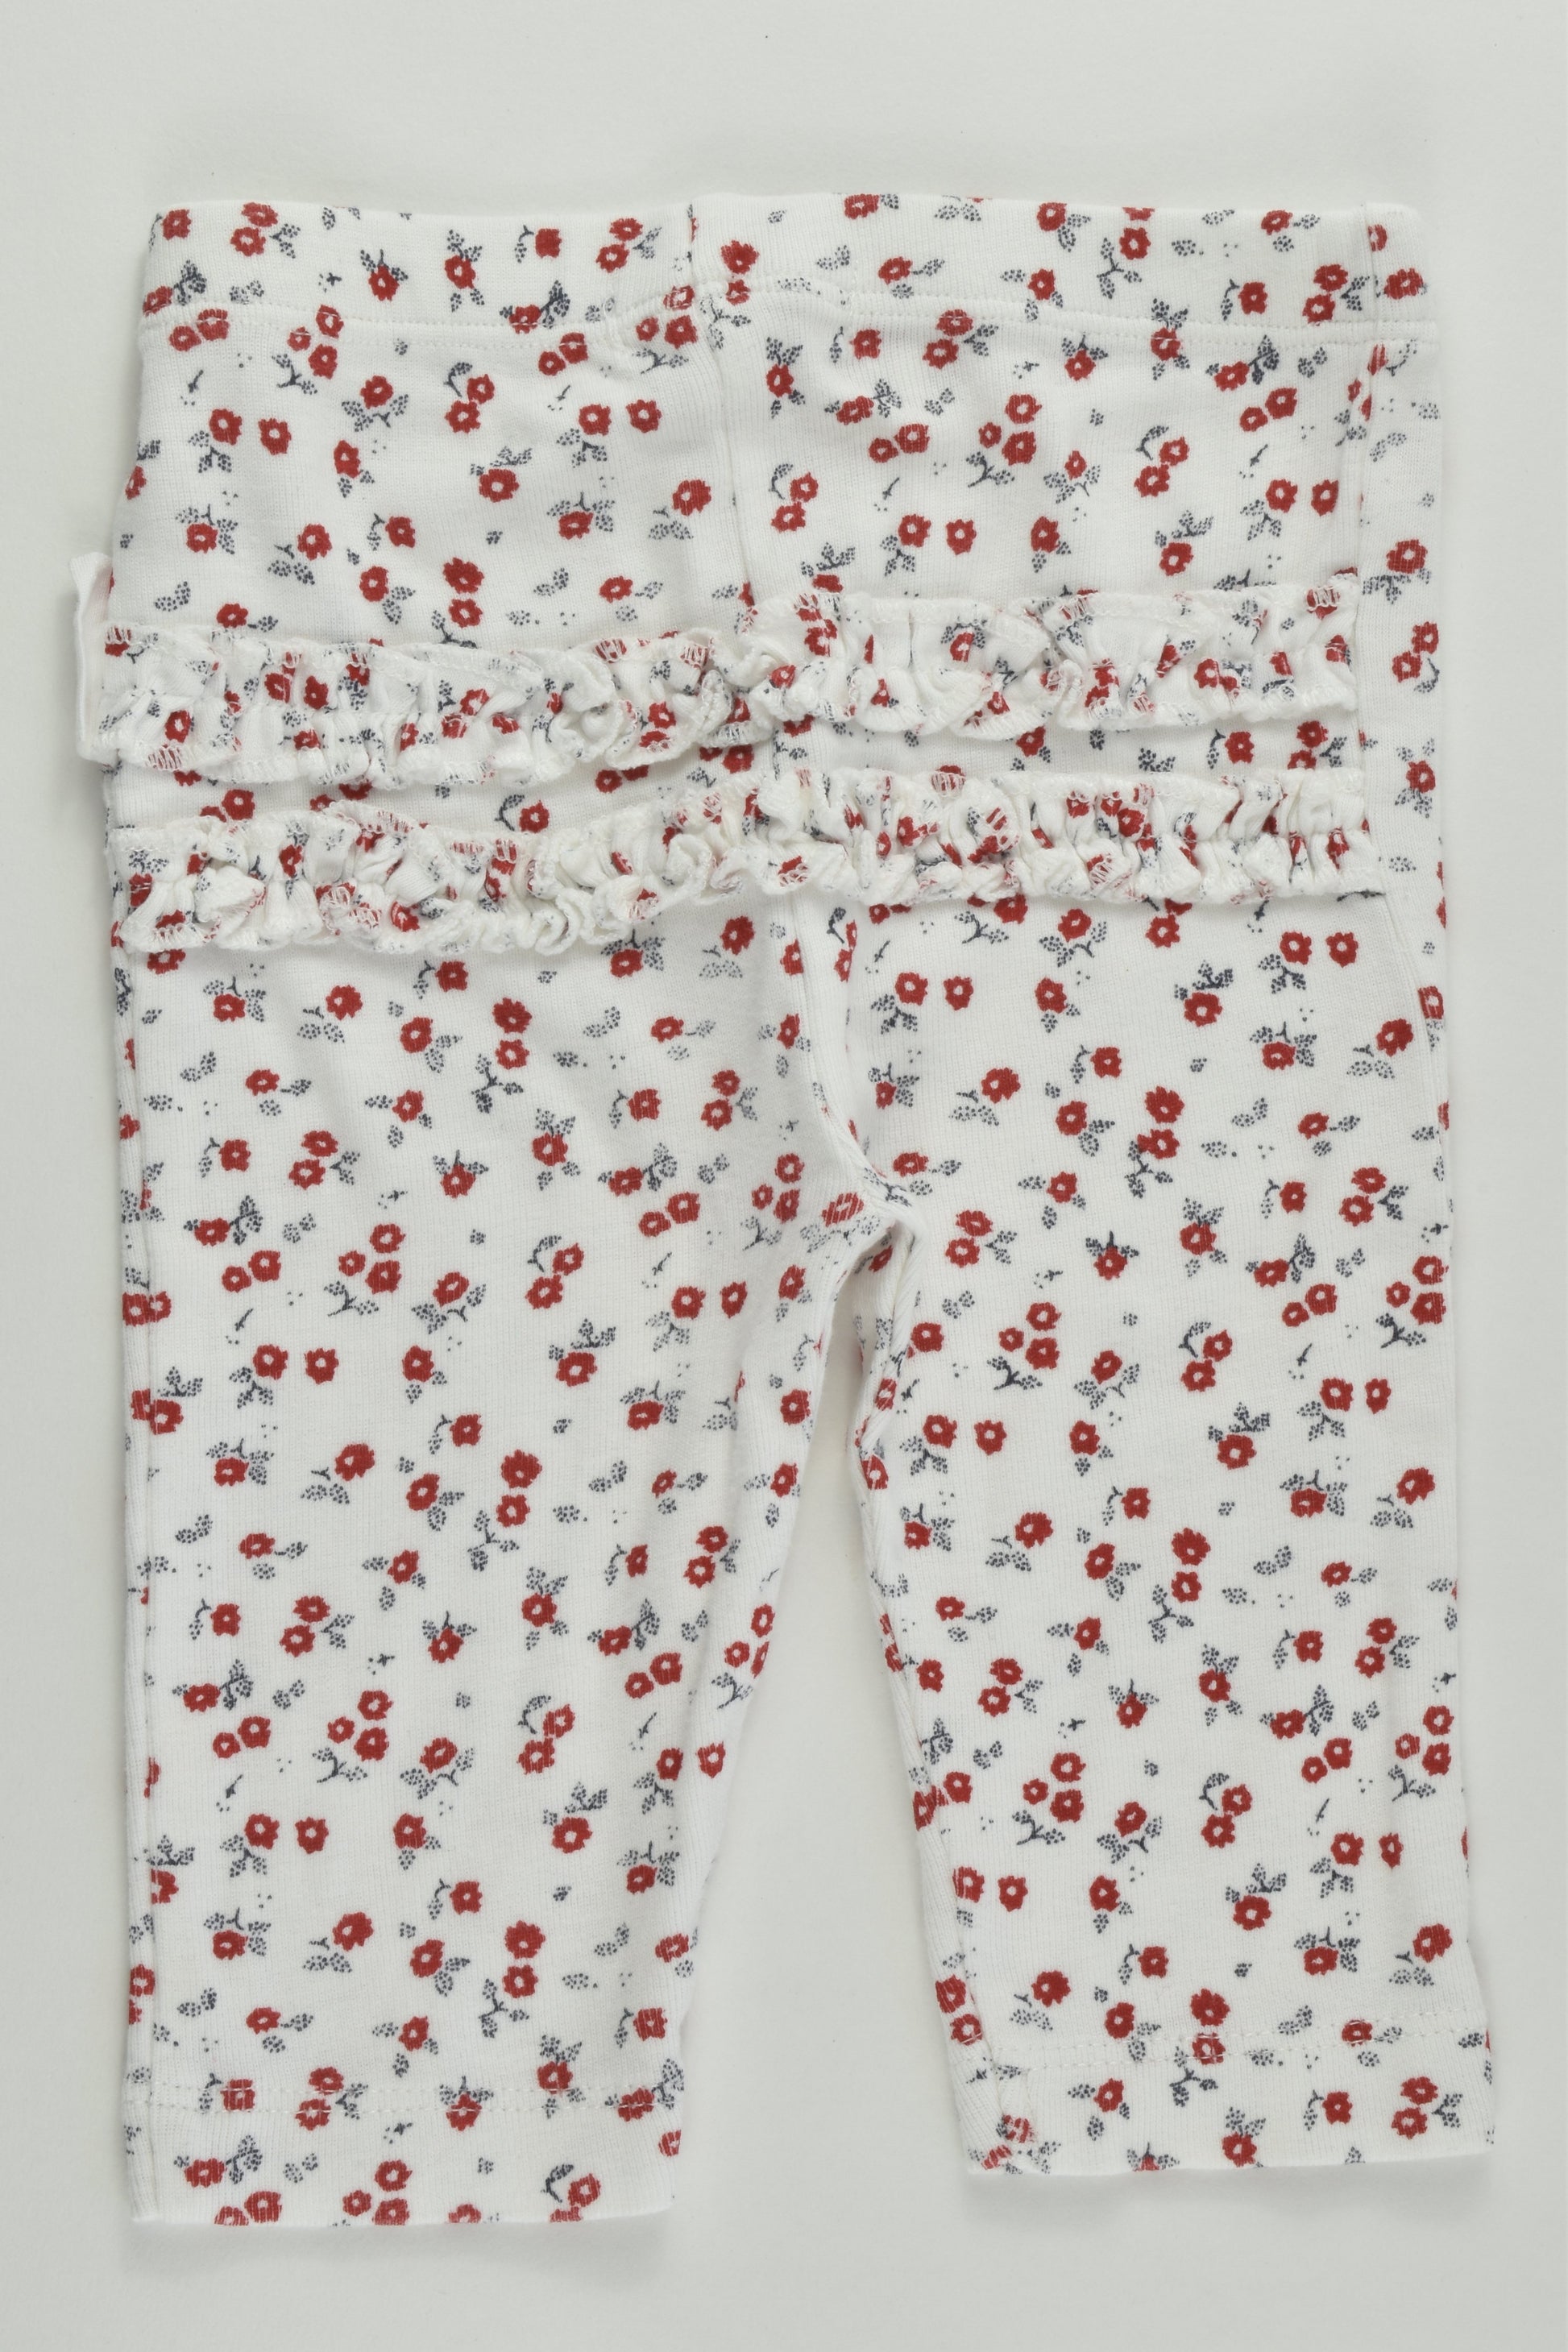 Purebaby Size 000 (0-3 months) Floral Ruffle Leggings